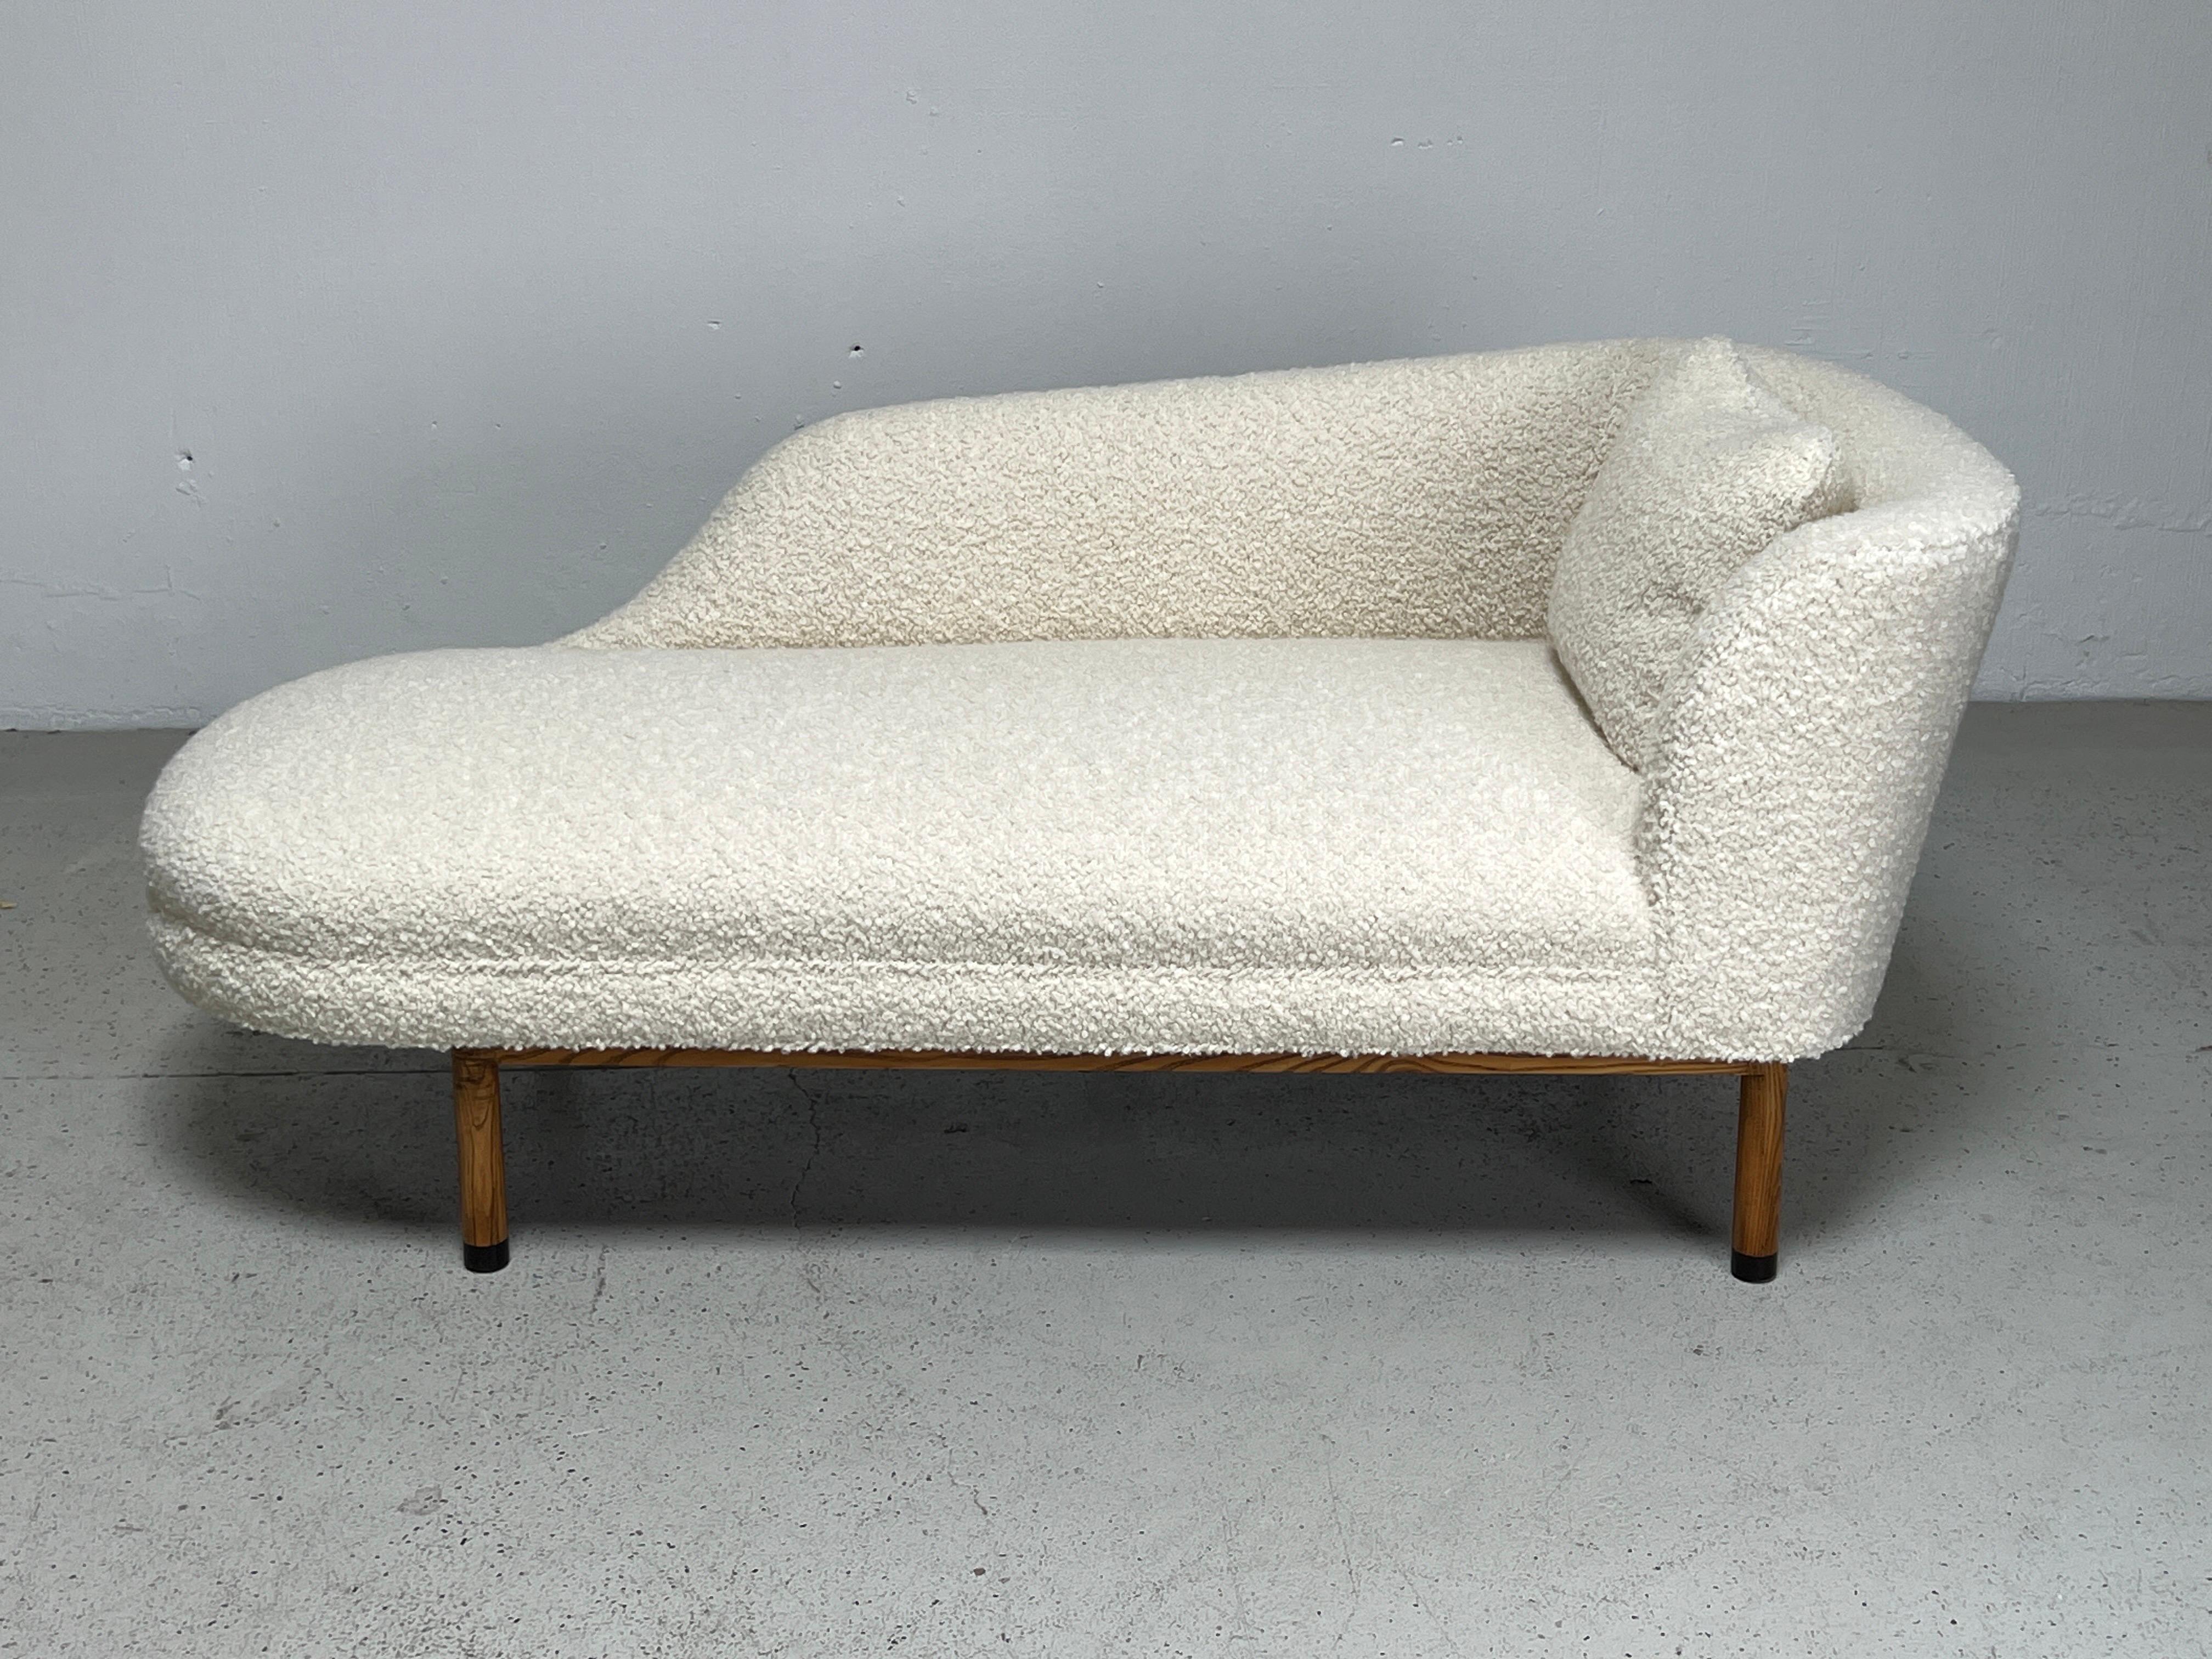 A right arm chaise lounge designed by Edward Wormley for Dunbar. Ash base with Ebony feet. Fully restored and upholstered in Holly Hunt / Teddy / Winter White. Matching left arm chaise also available.